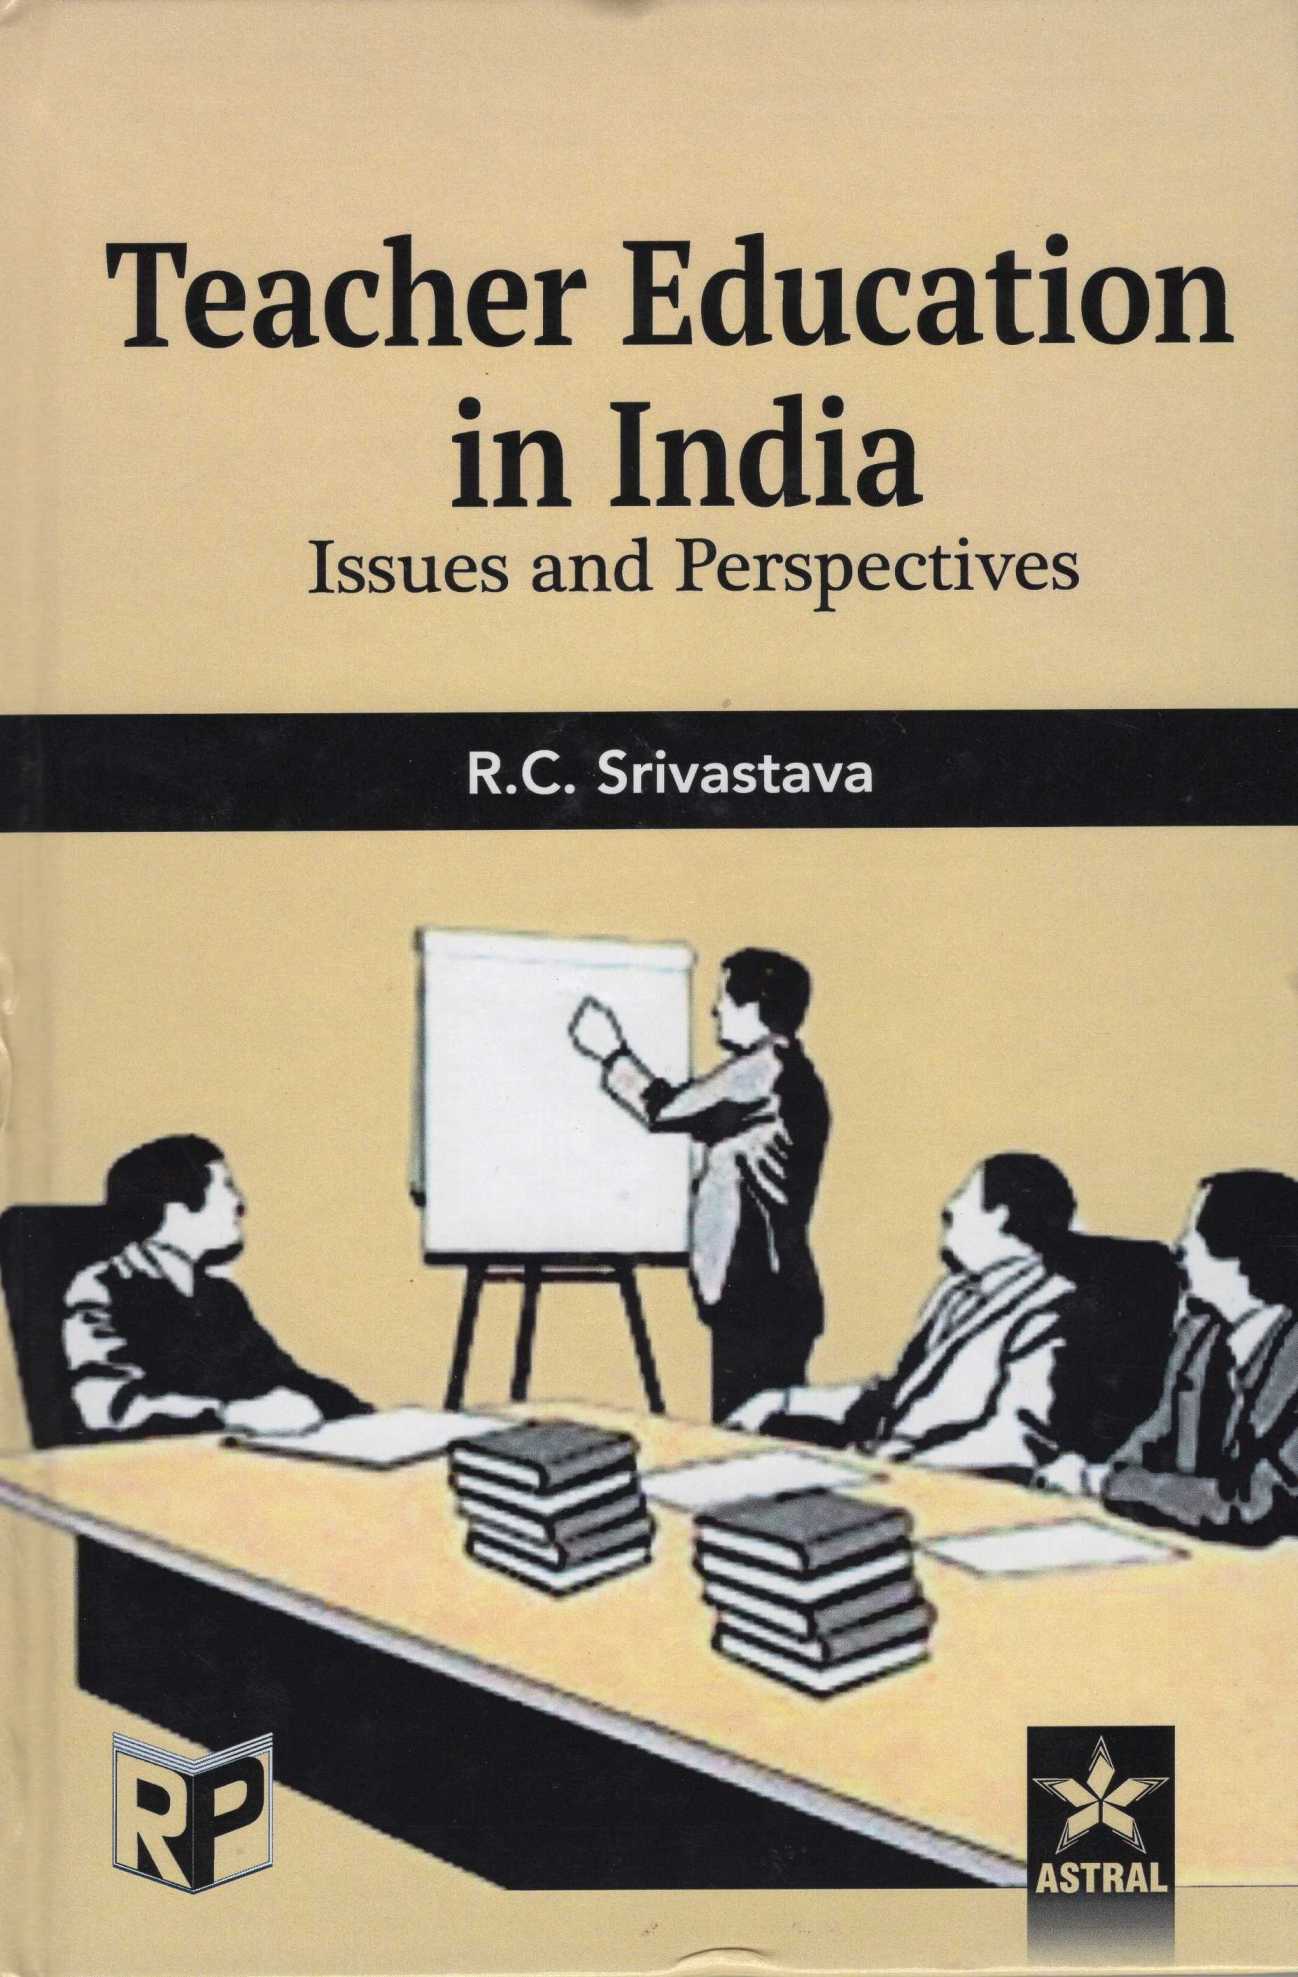 Teacher Education in India: Issues and Perspectives